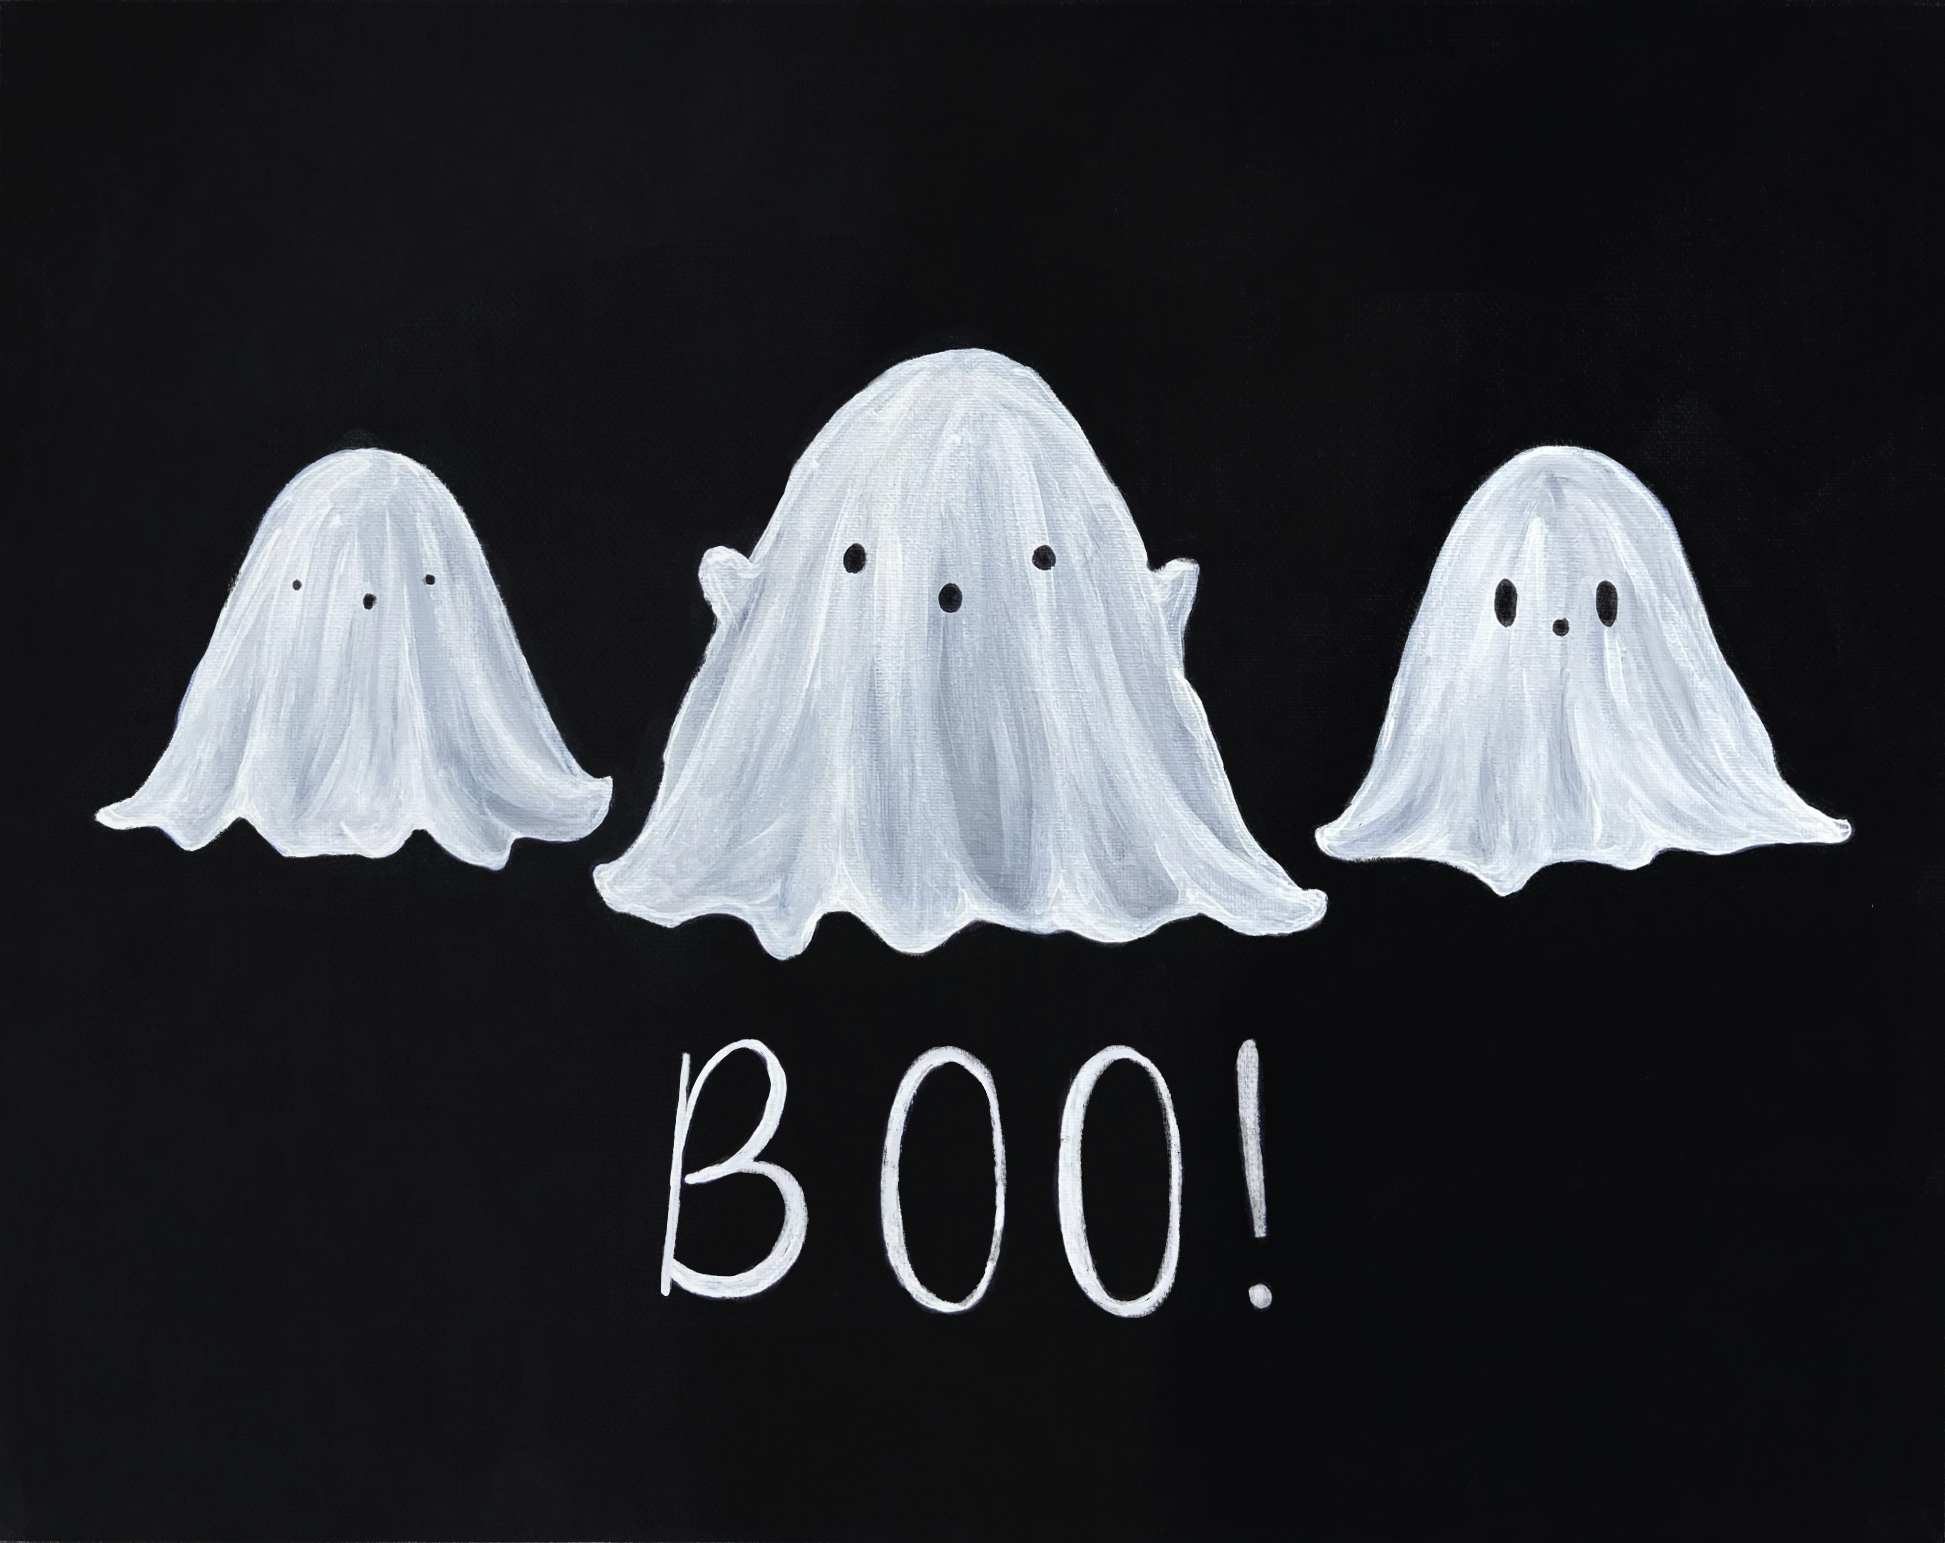 A Cute Ghosts Boo  experience project by Yaymaker